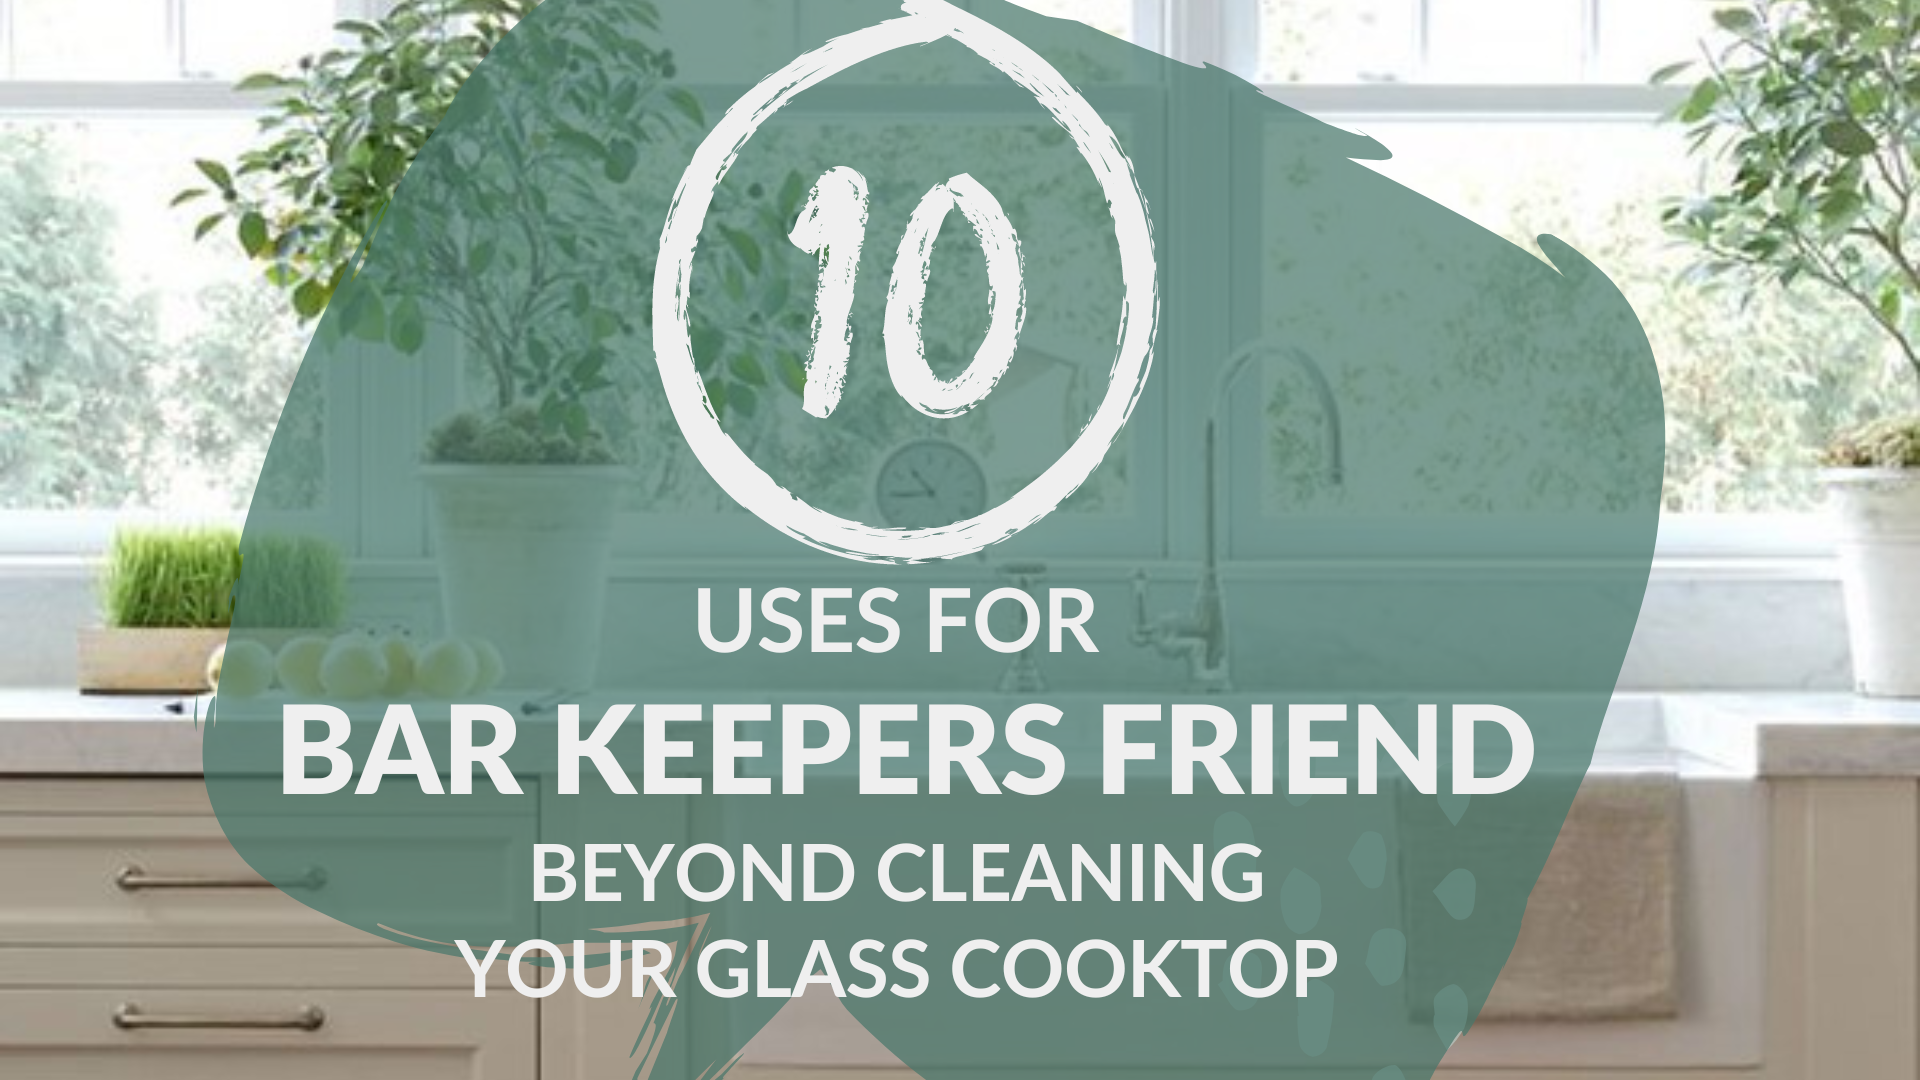 10 uses for barkeepers friend besides glass and ceramic cooktop cleaning